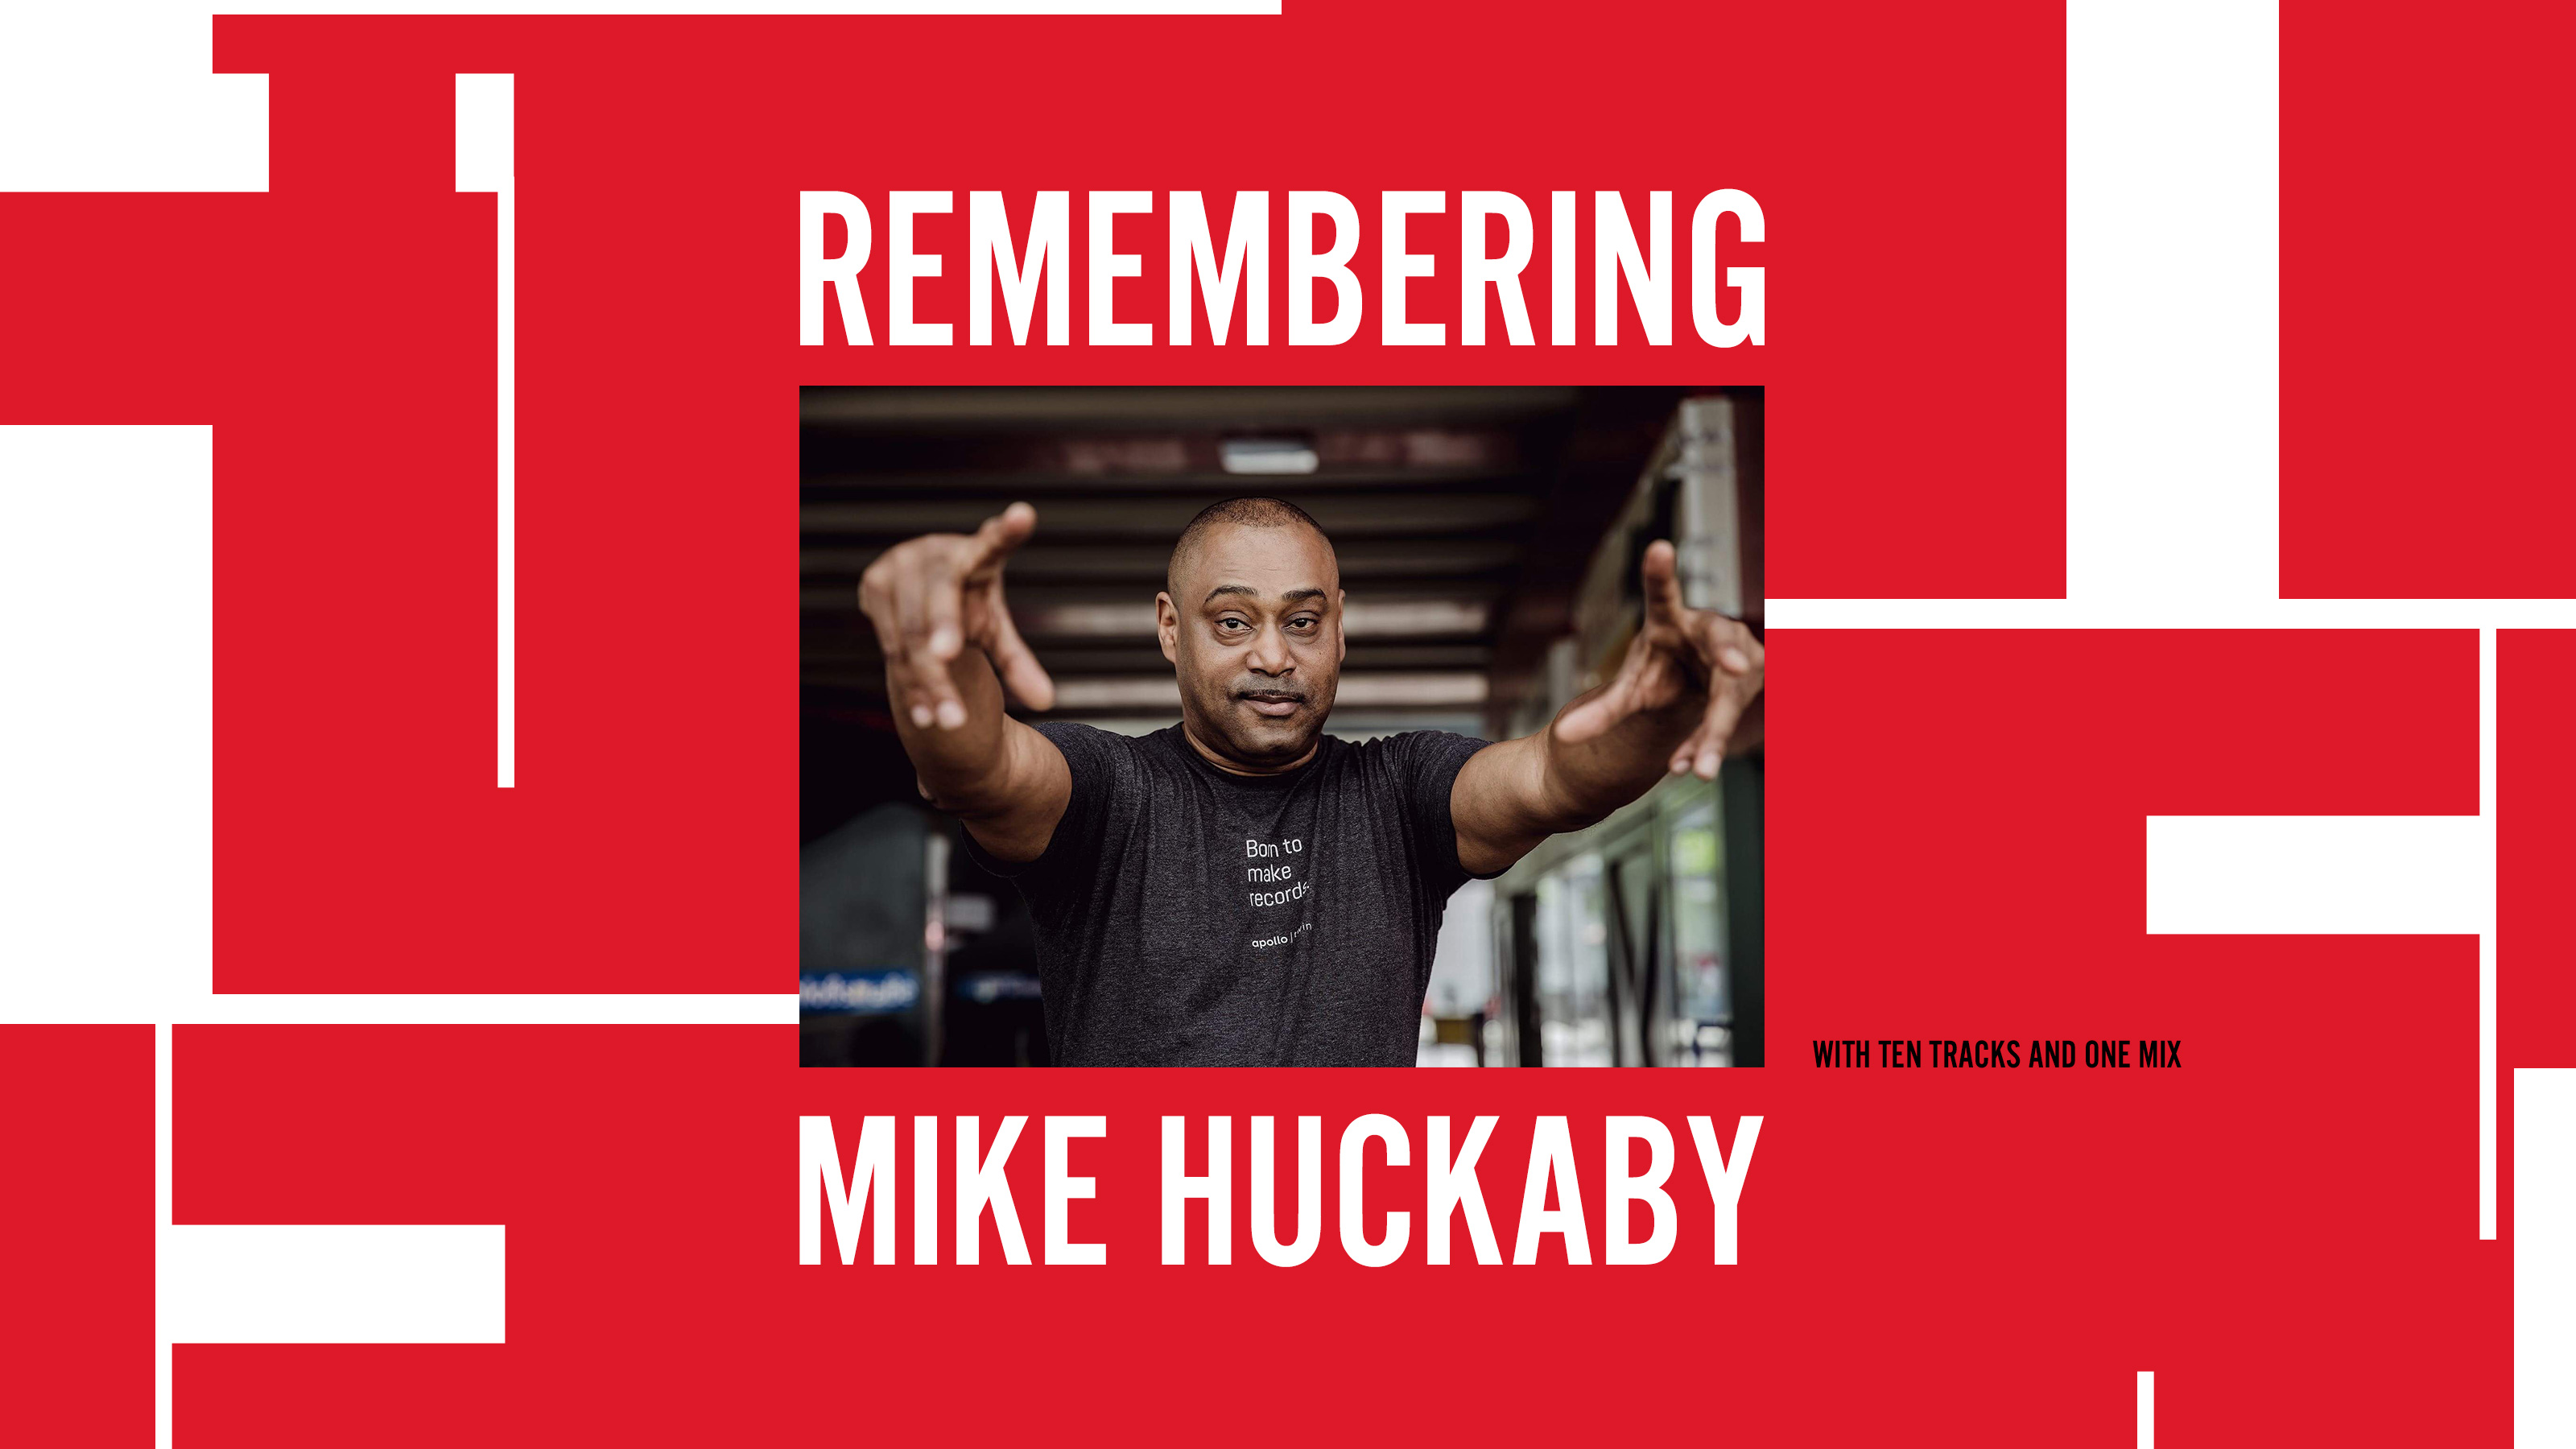 Remembering Mike Huckaby: Ten Tracks And One Mix